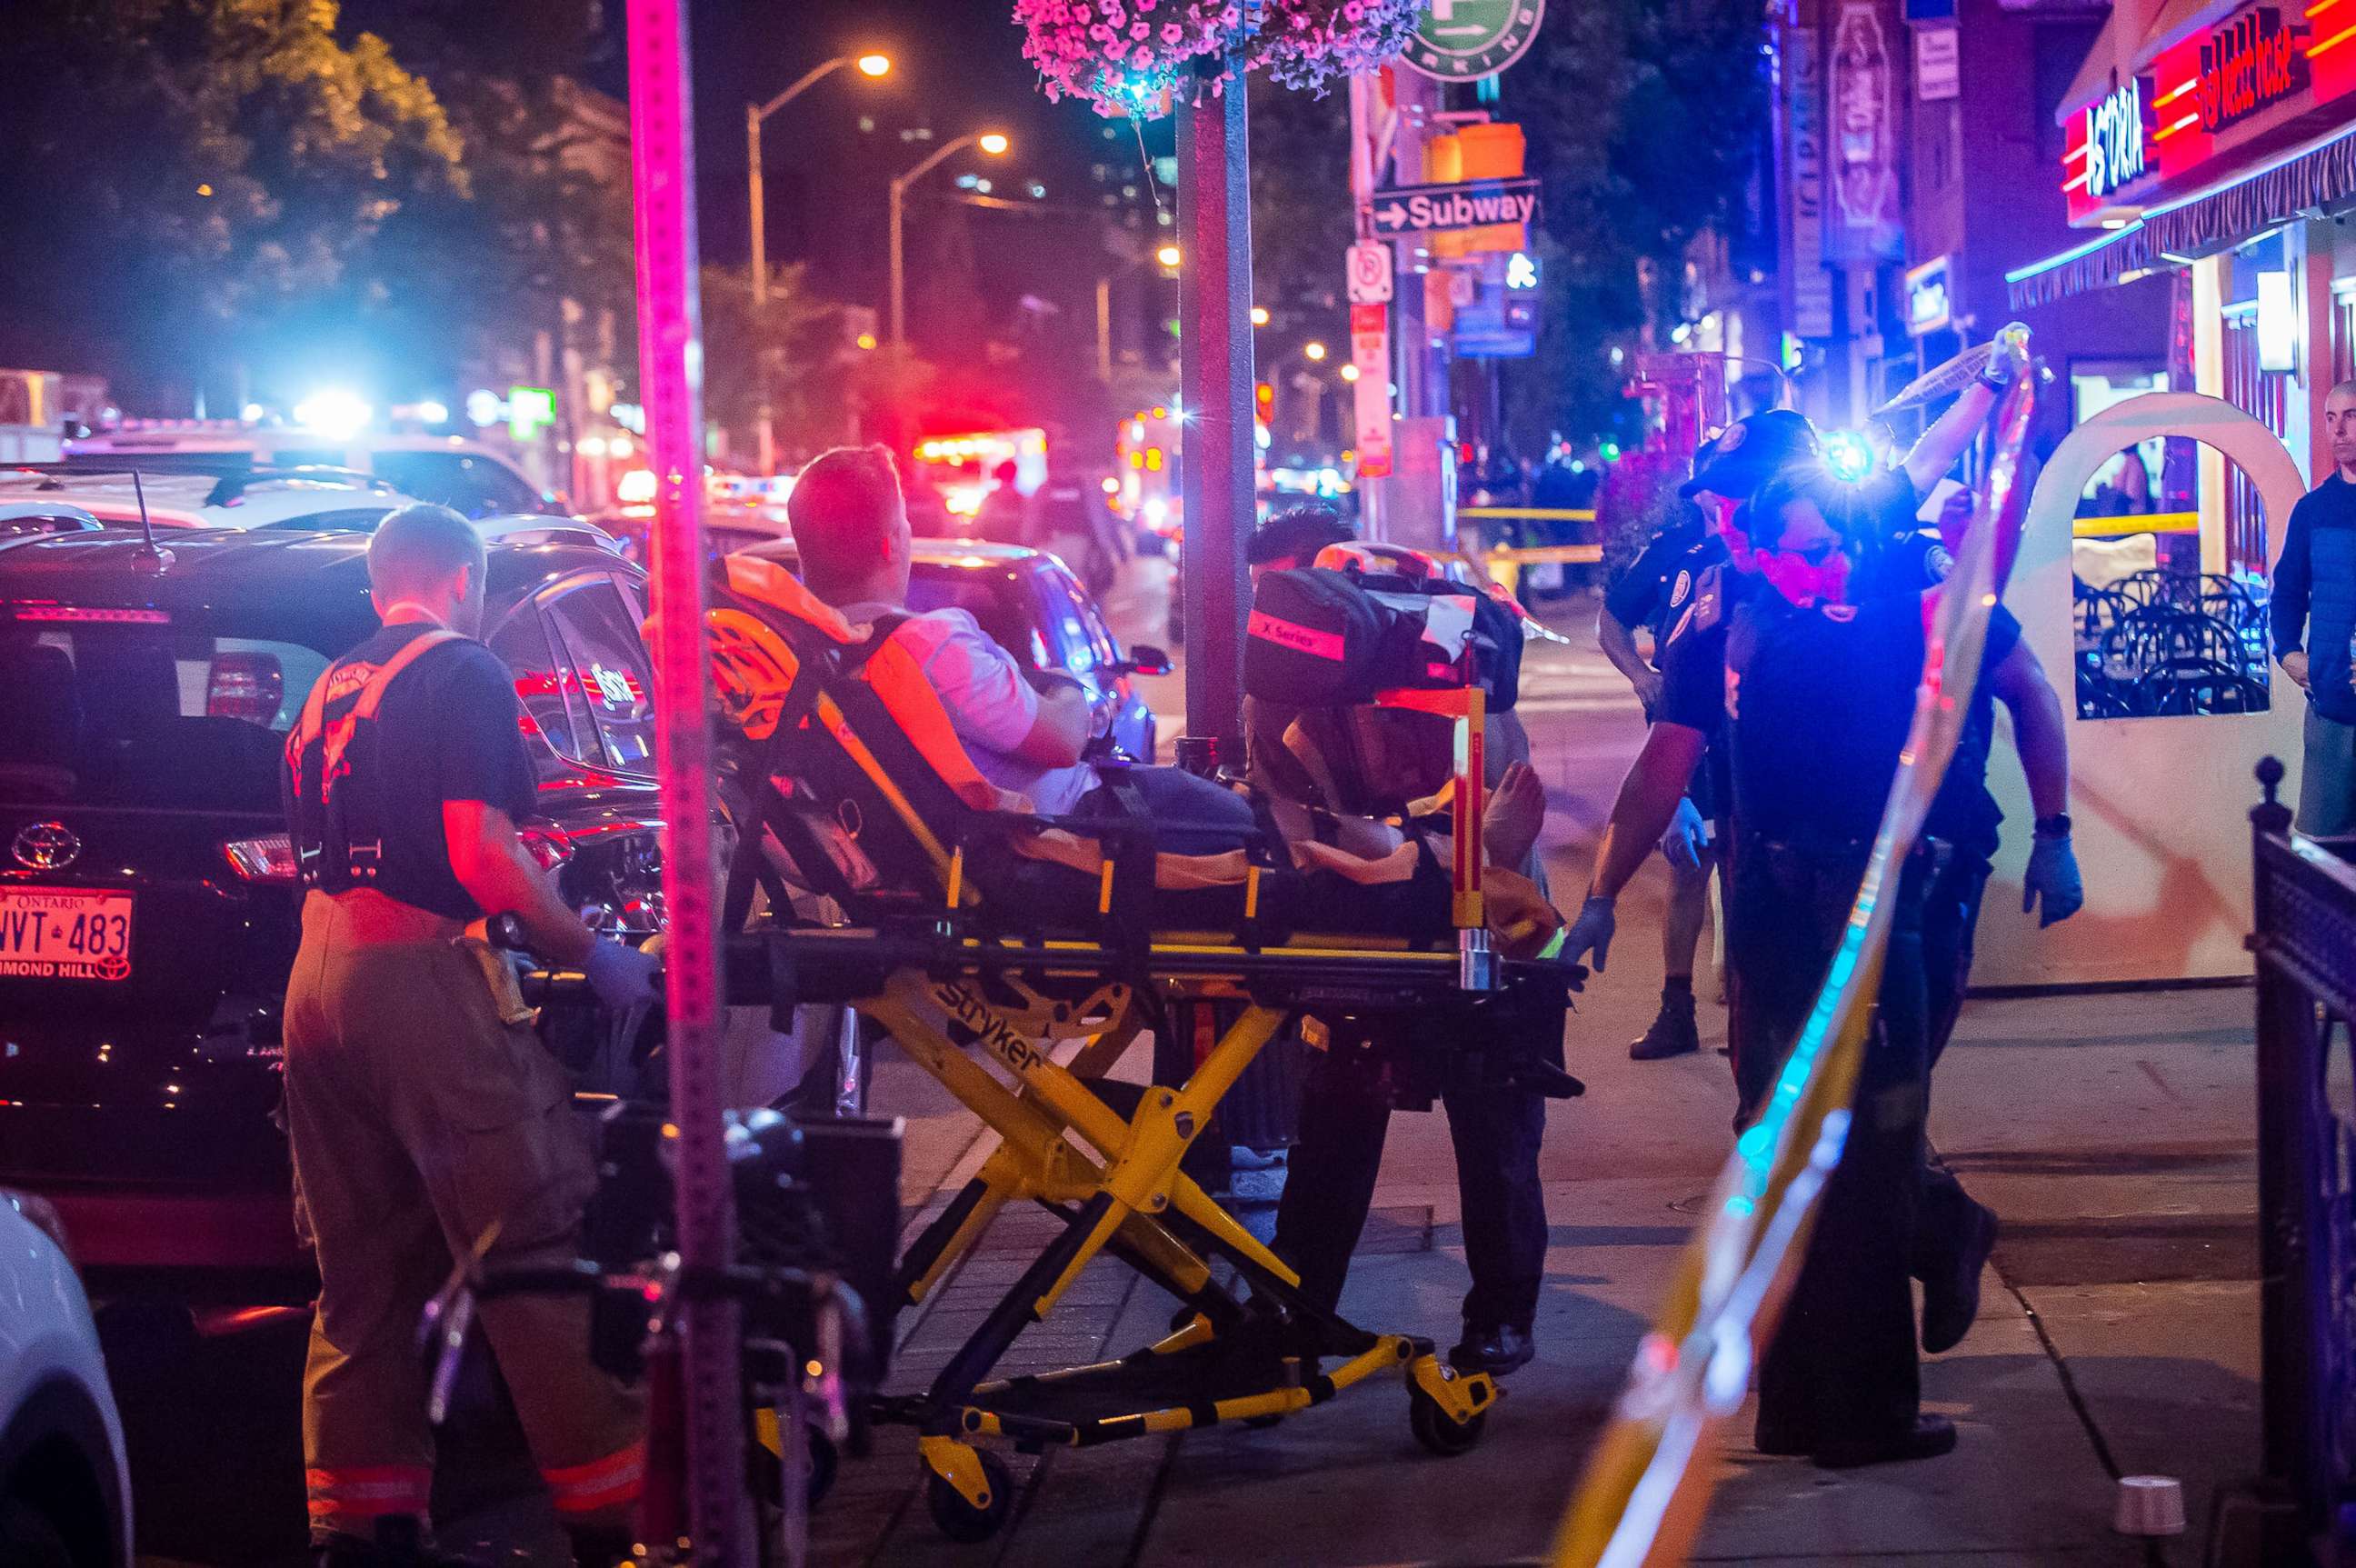 PHOTO: A man is transported in a stretcher after a shooting in Toronto on the evening of July 22, 2018.